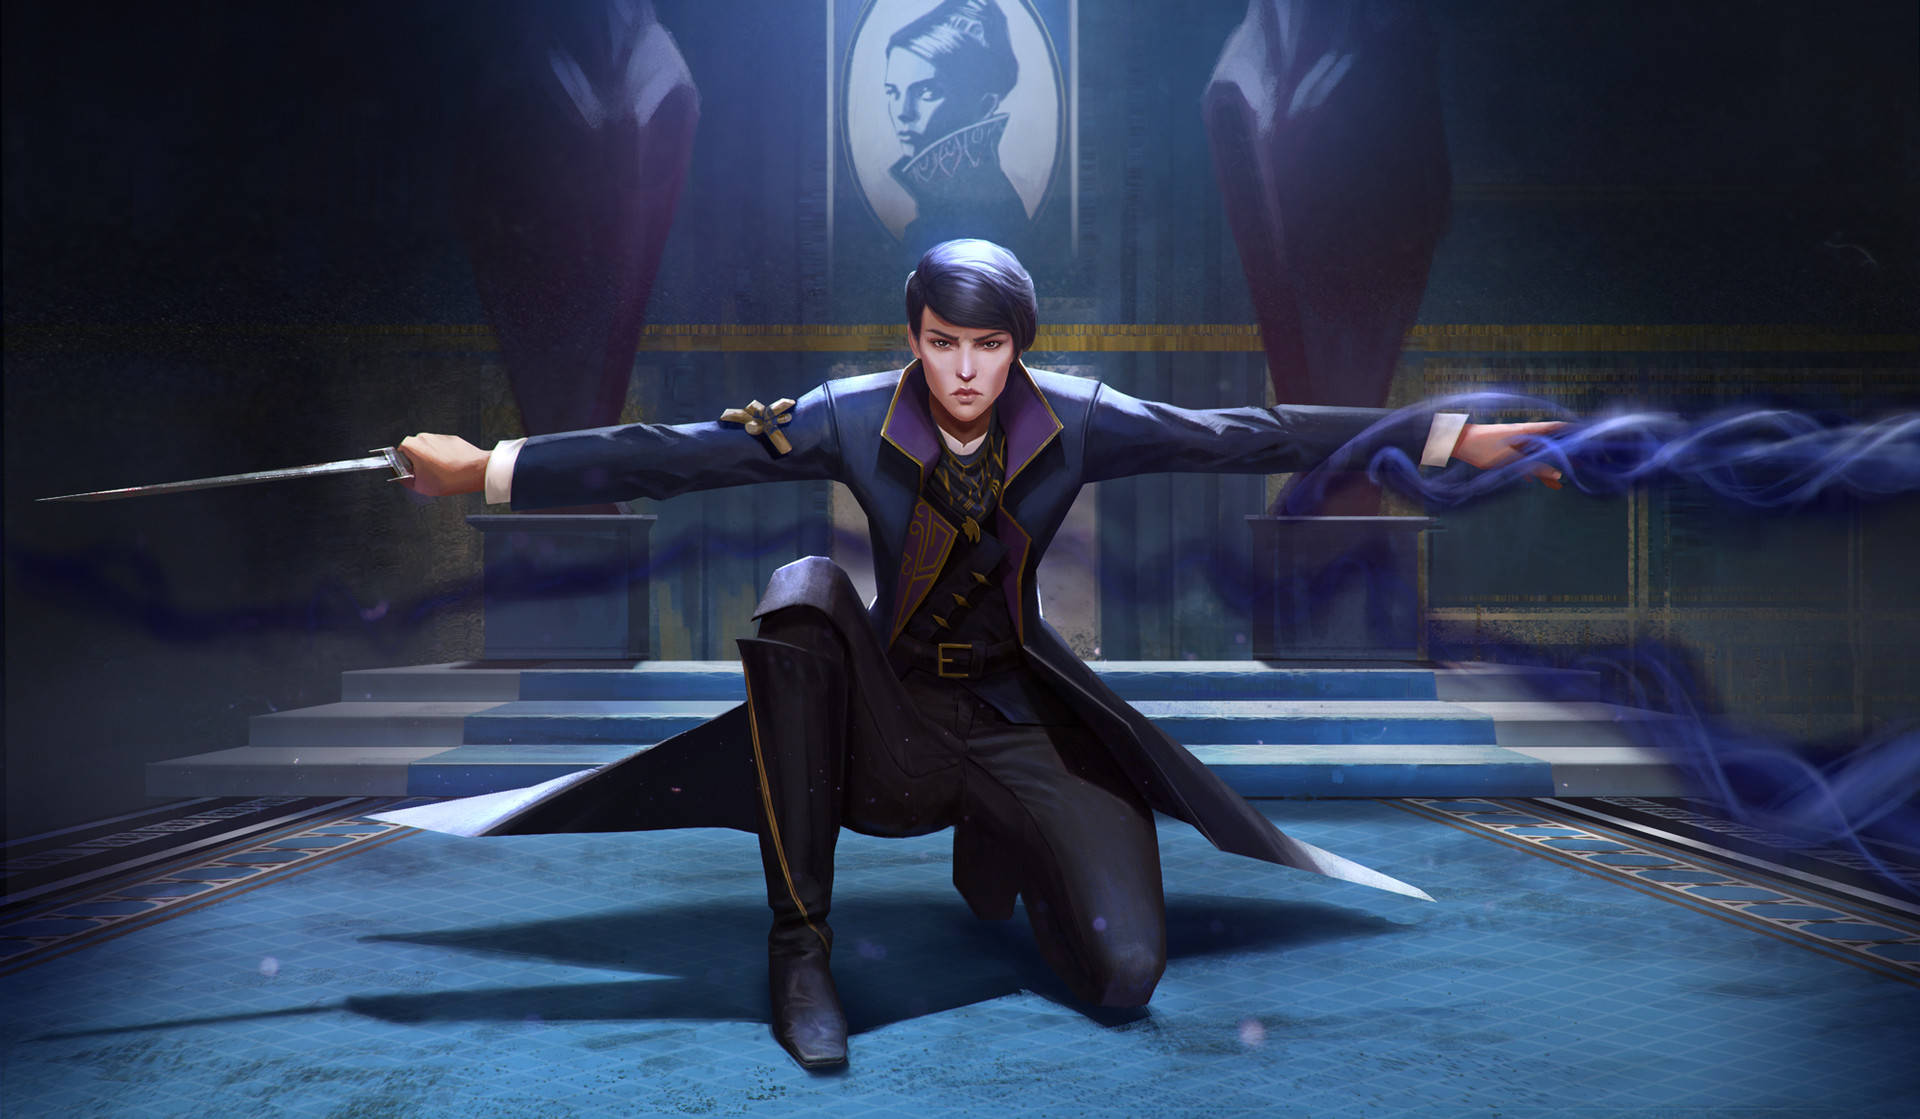 Dishonored 2 Emily Kaldwin In Throne Room Background